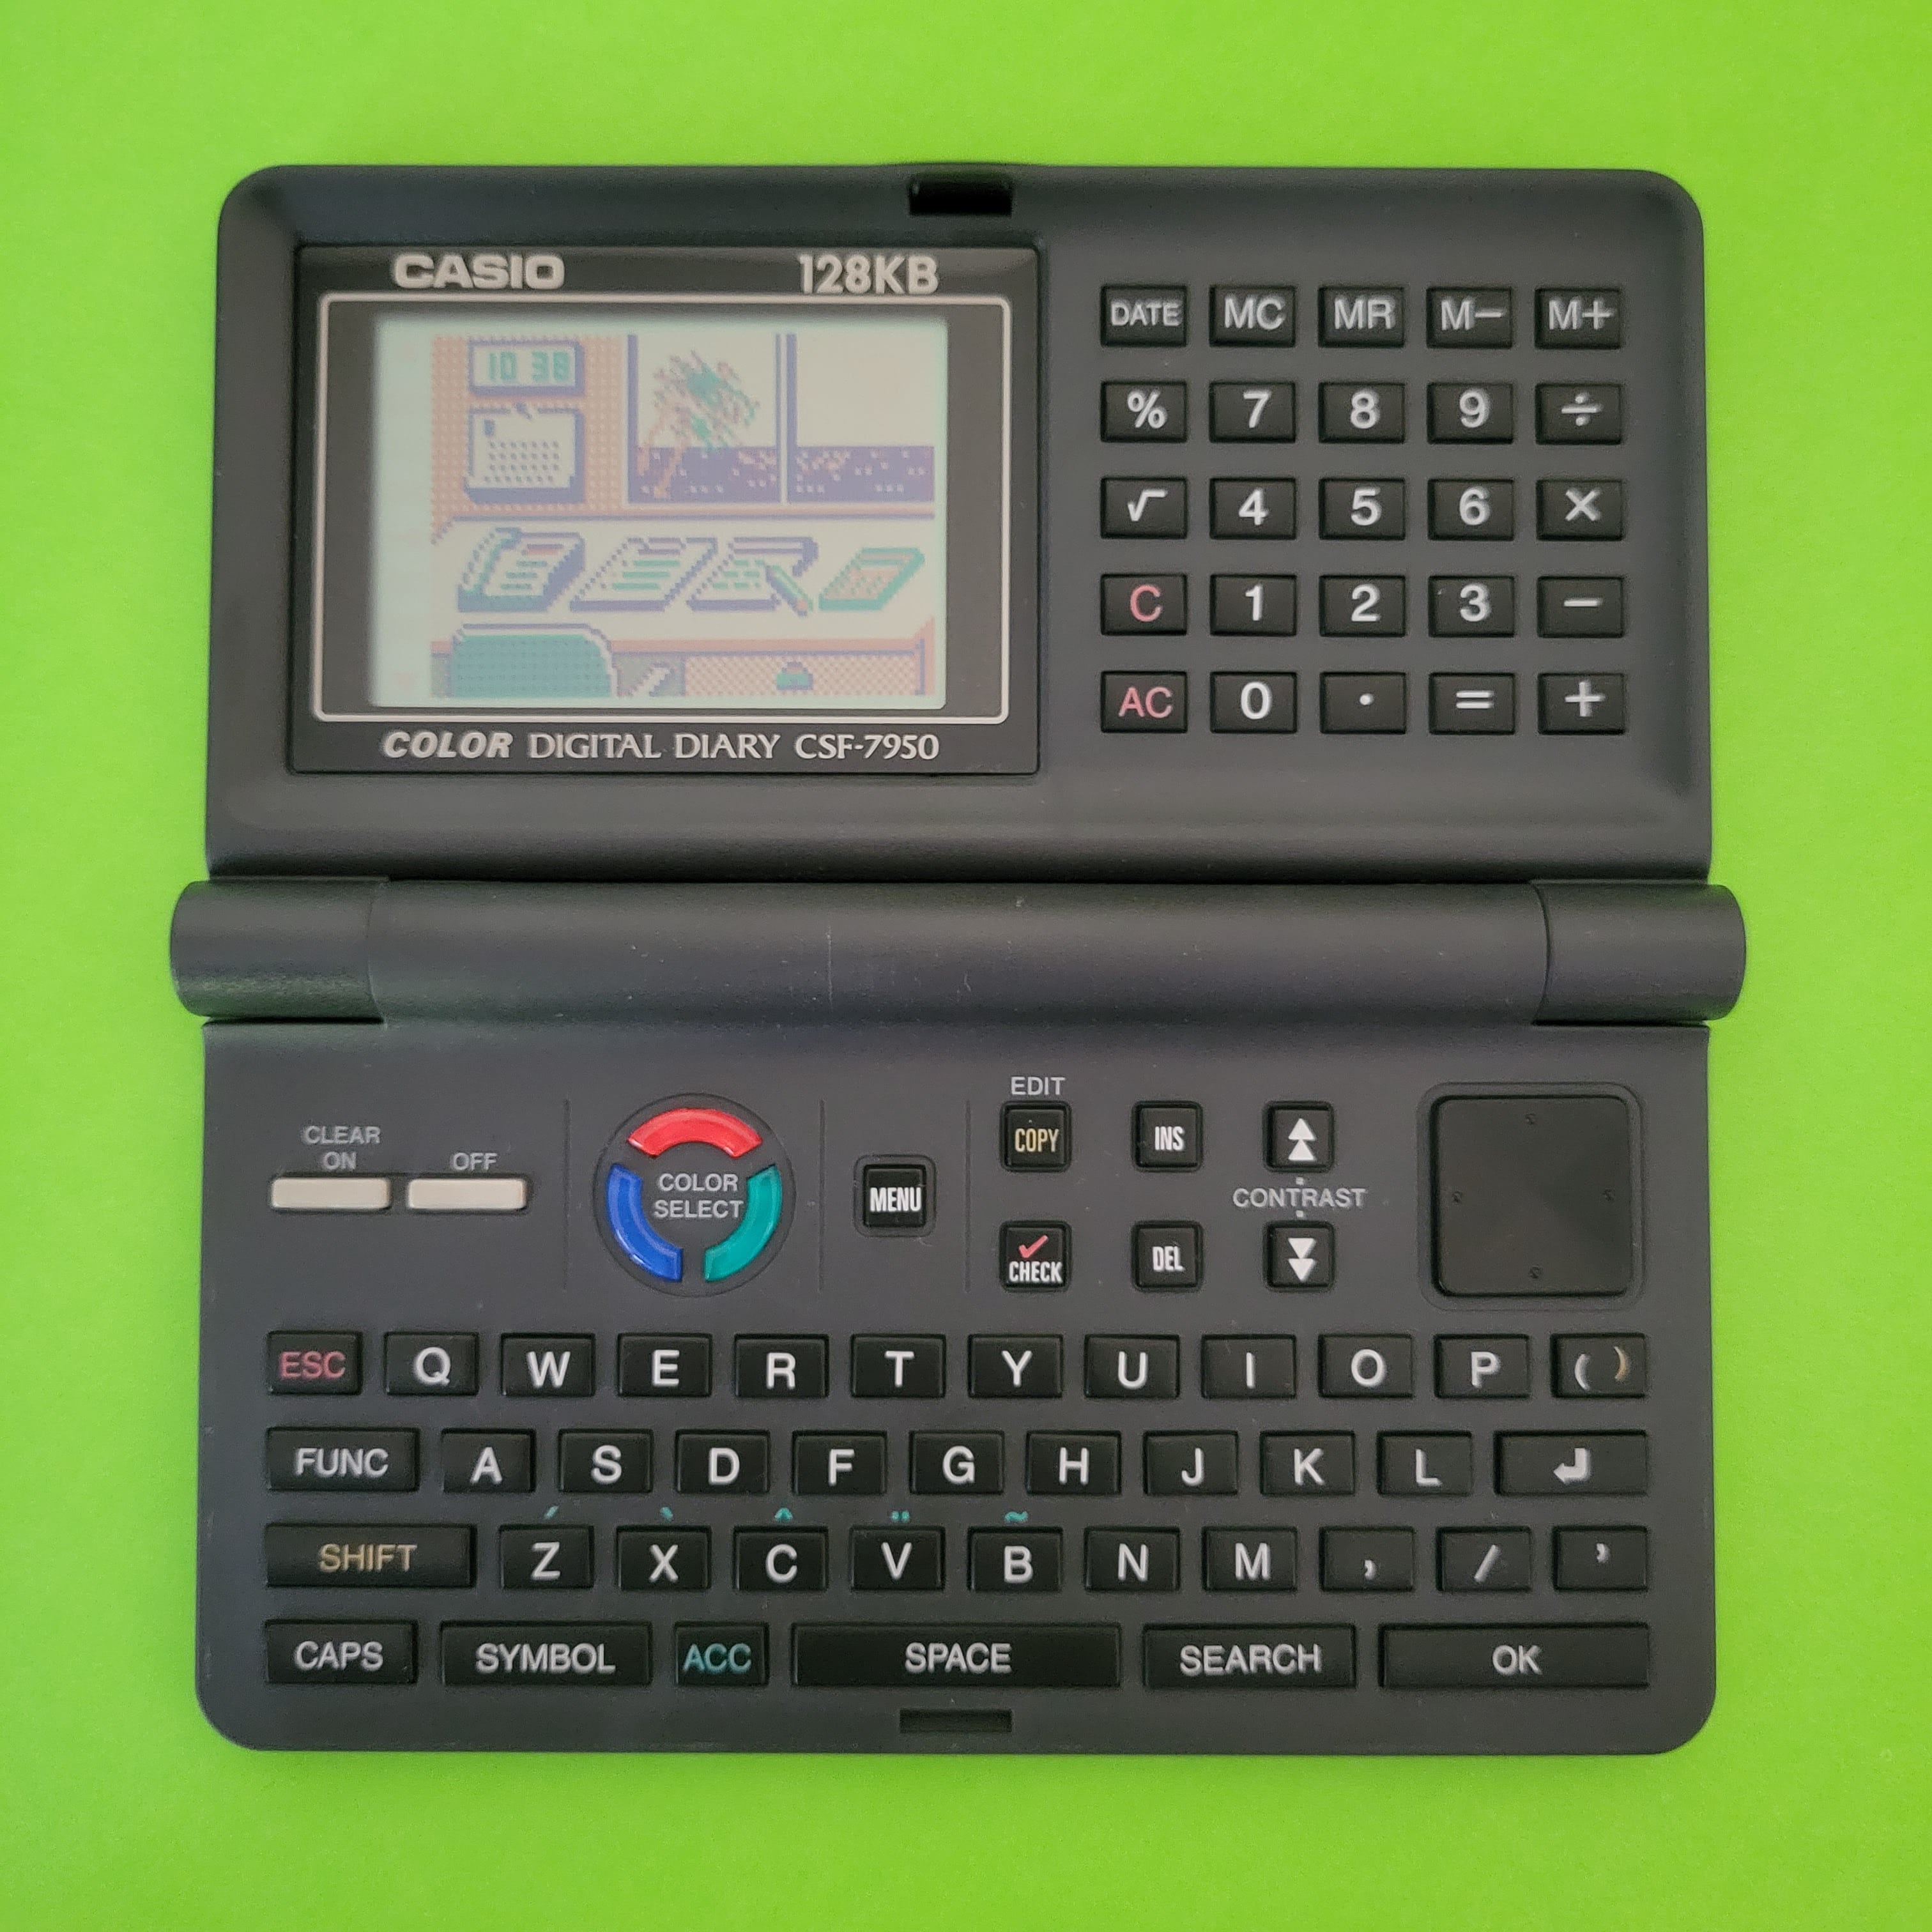 an image of a Casio Color Digital Diary CSF-7950 personal organizer